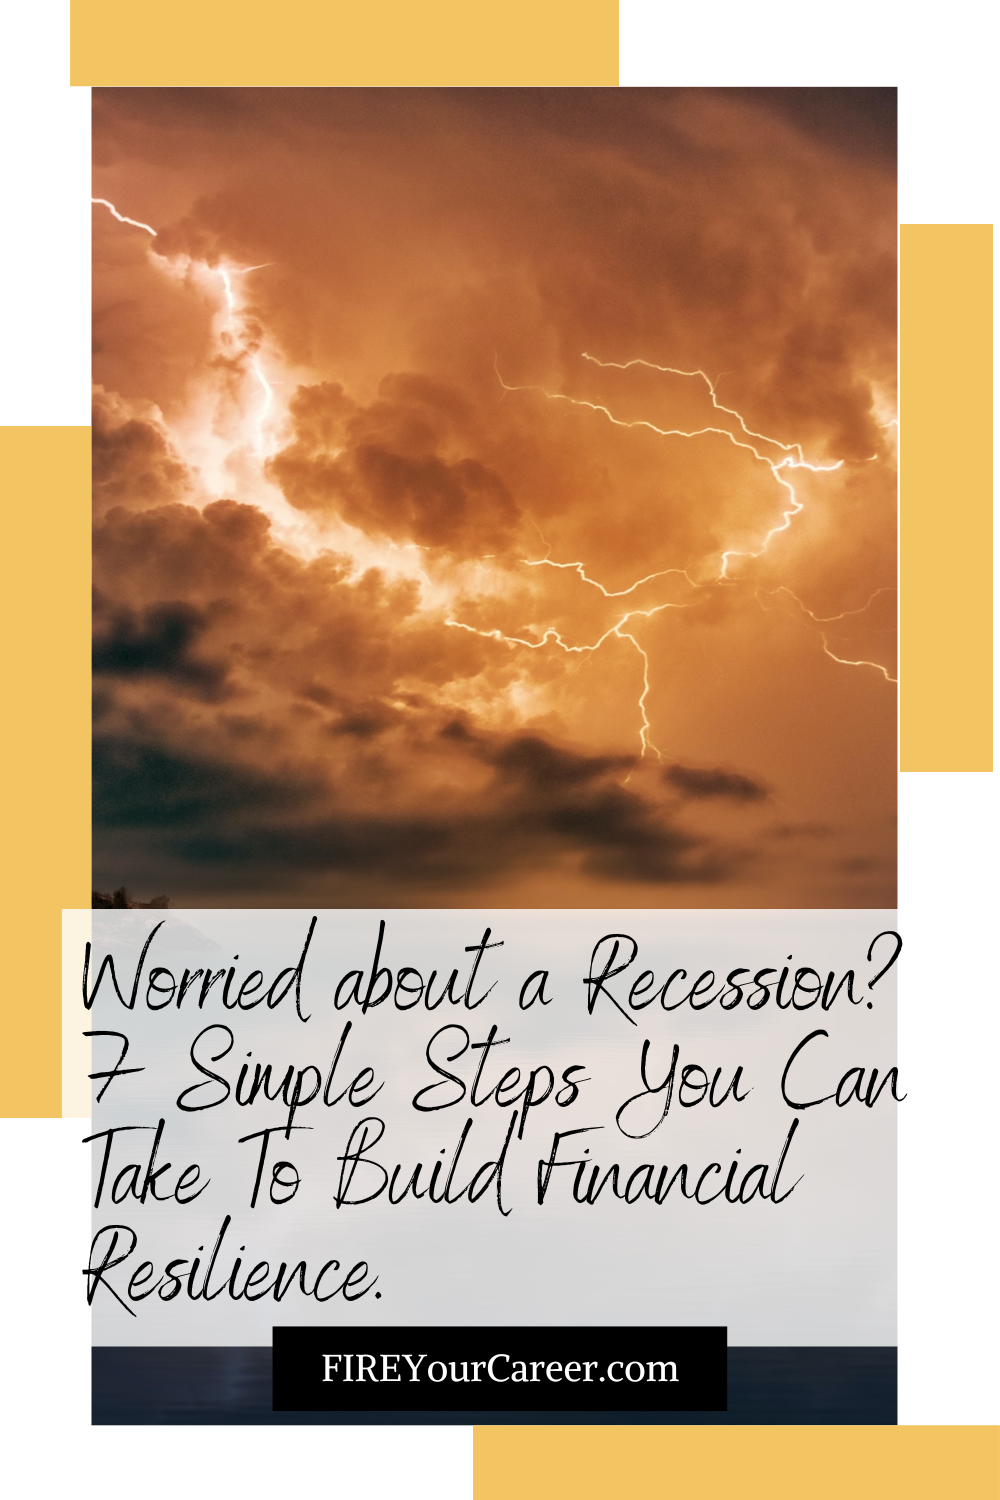 Worried a Recession Will Impact Your Personal Finances Here Are 7 Simple Steps You Can Take To Build Financial Resilience. Pinterest